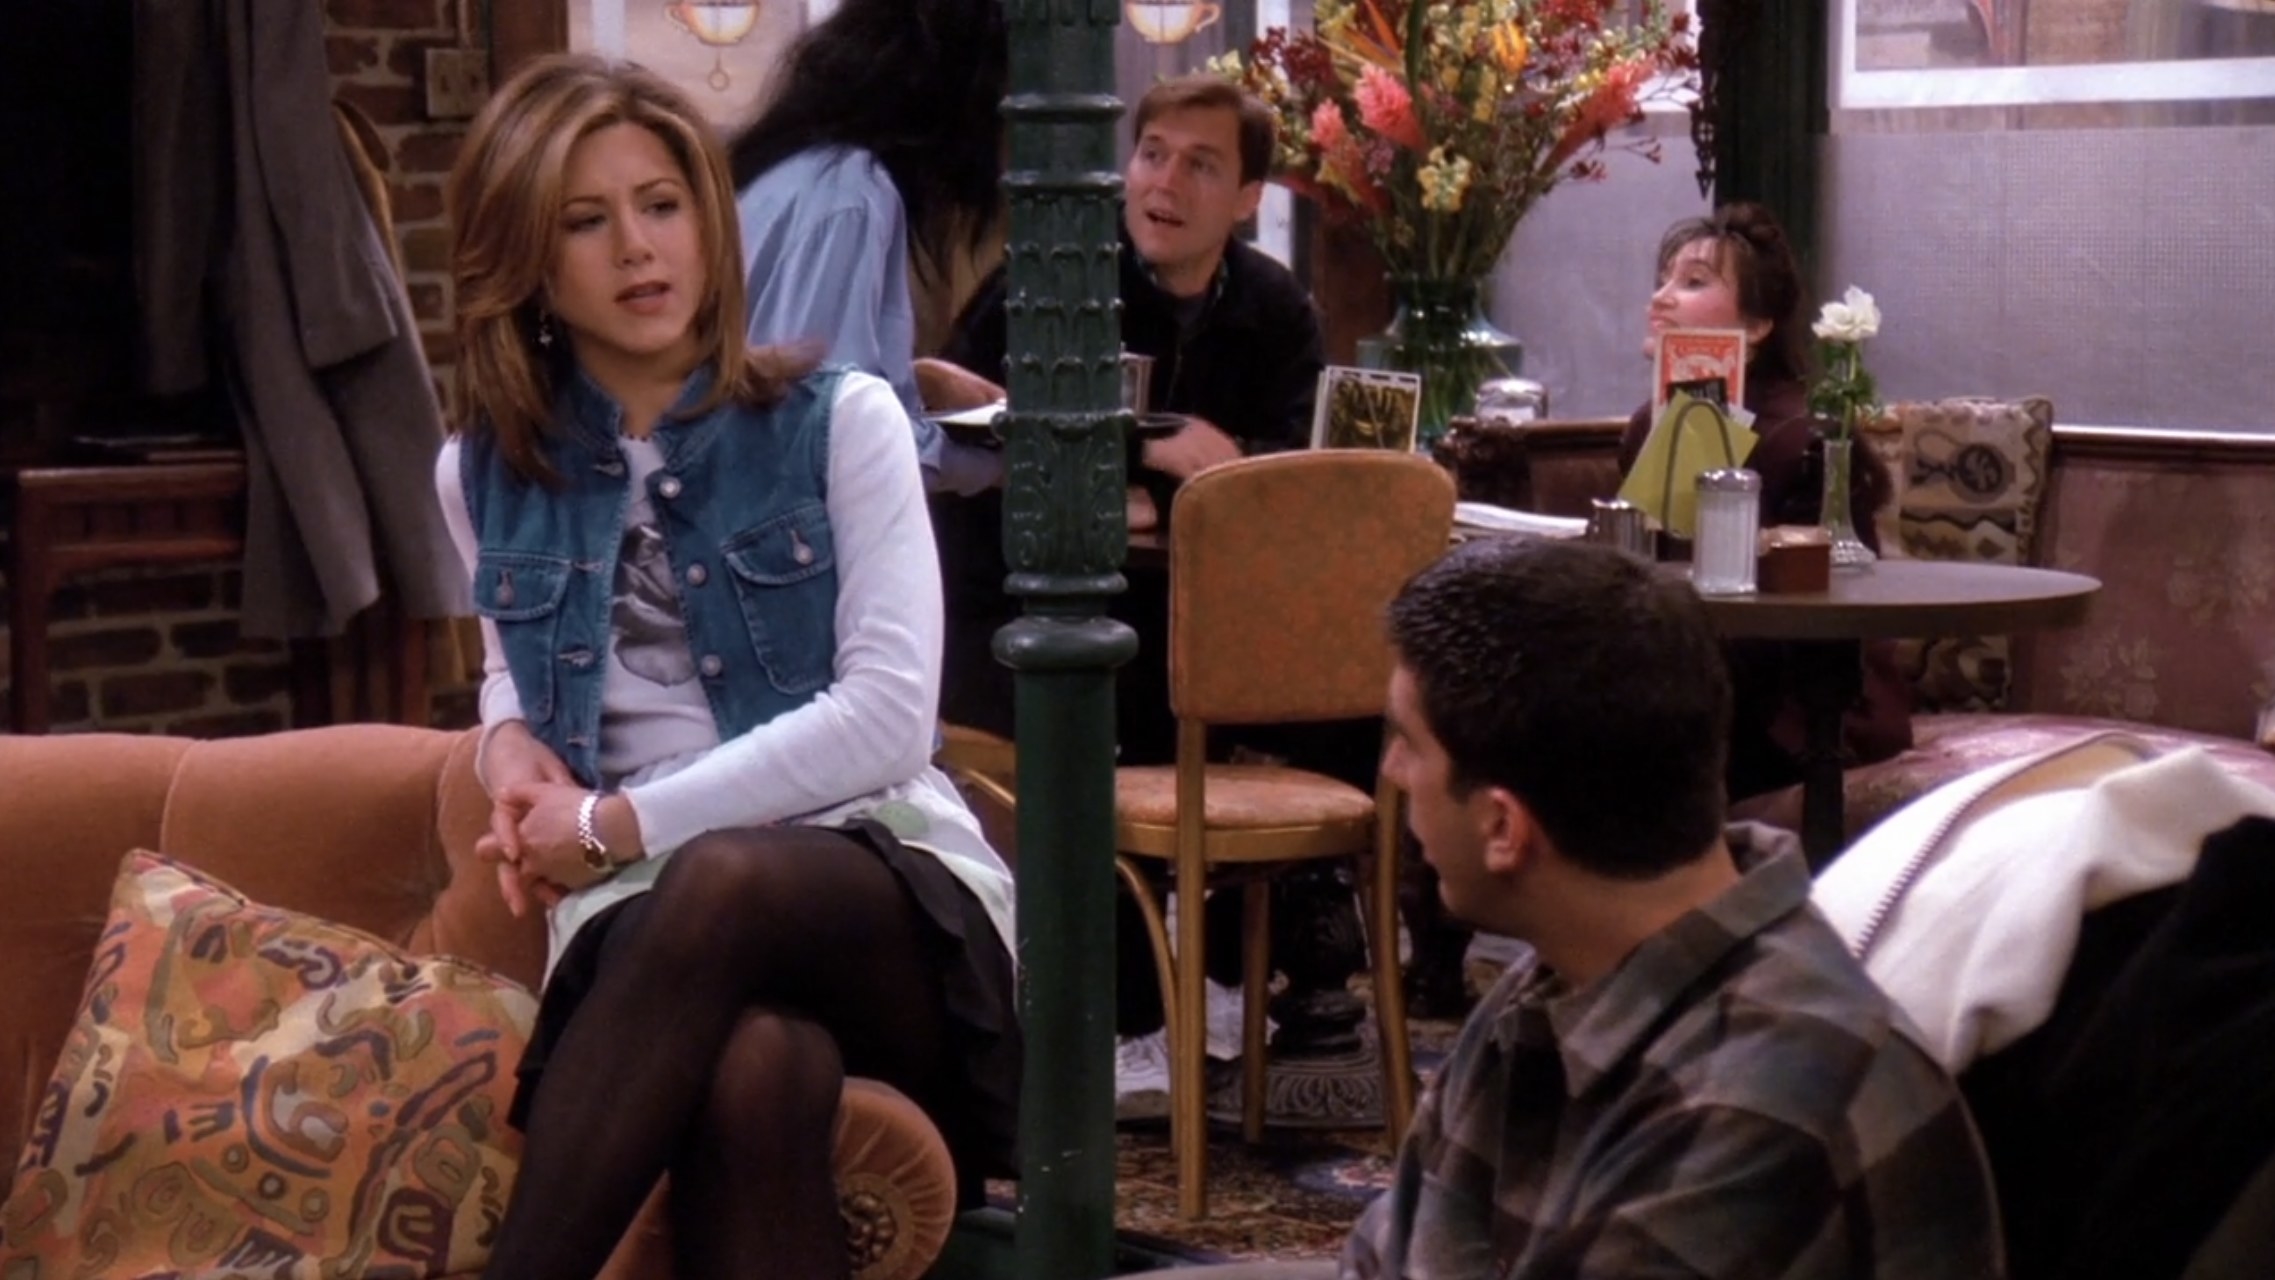 rachel in black tights a black skirt a white long sleeved shirt with a rose on it and a denim vest on friends